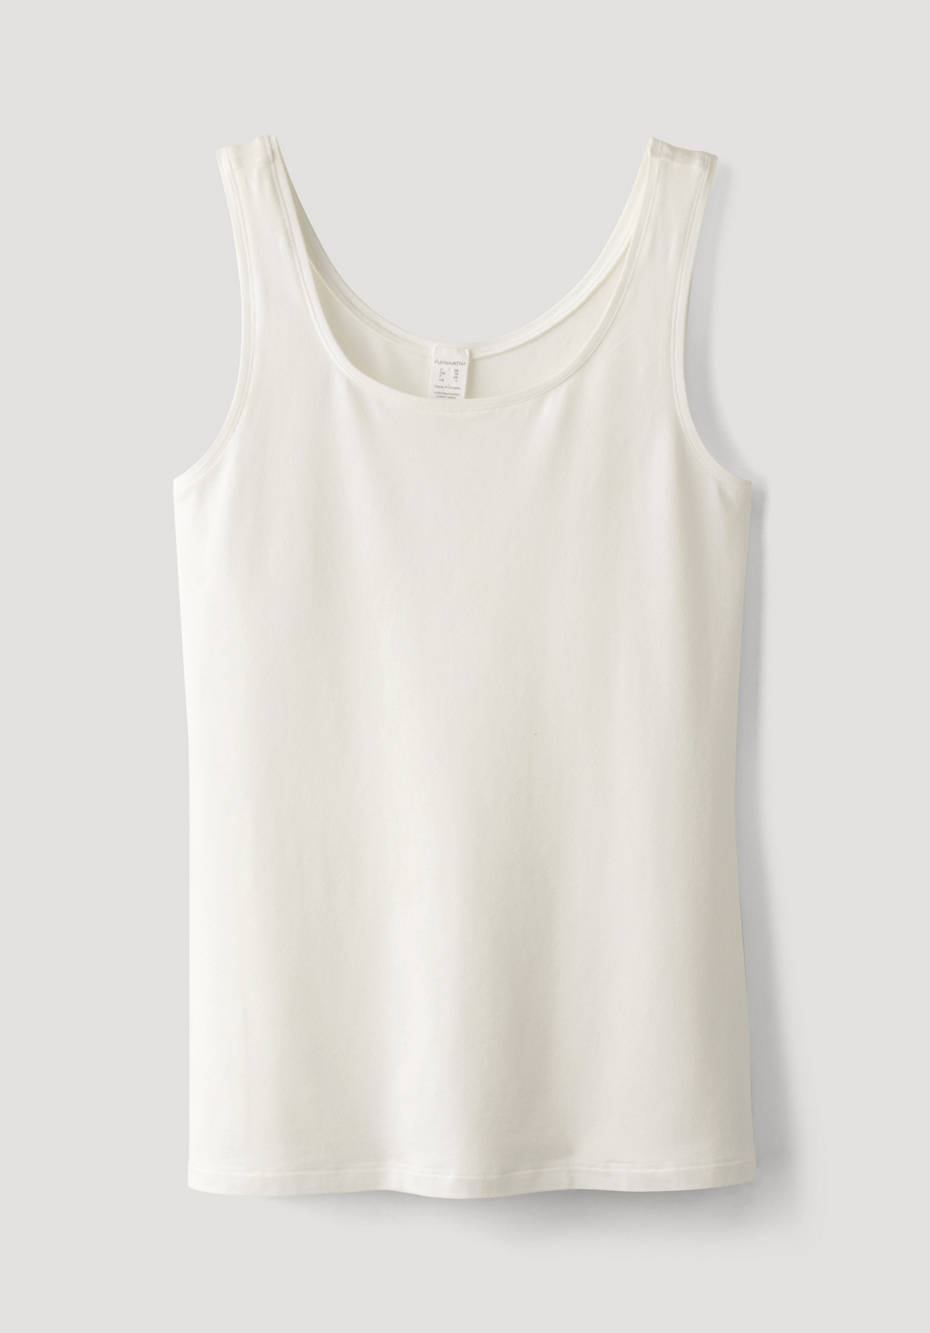 Top made of organic cotton and TENCEL ™ Modal